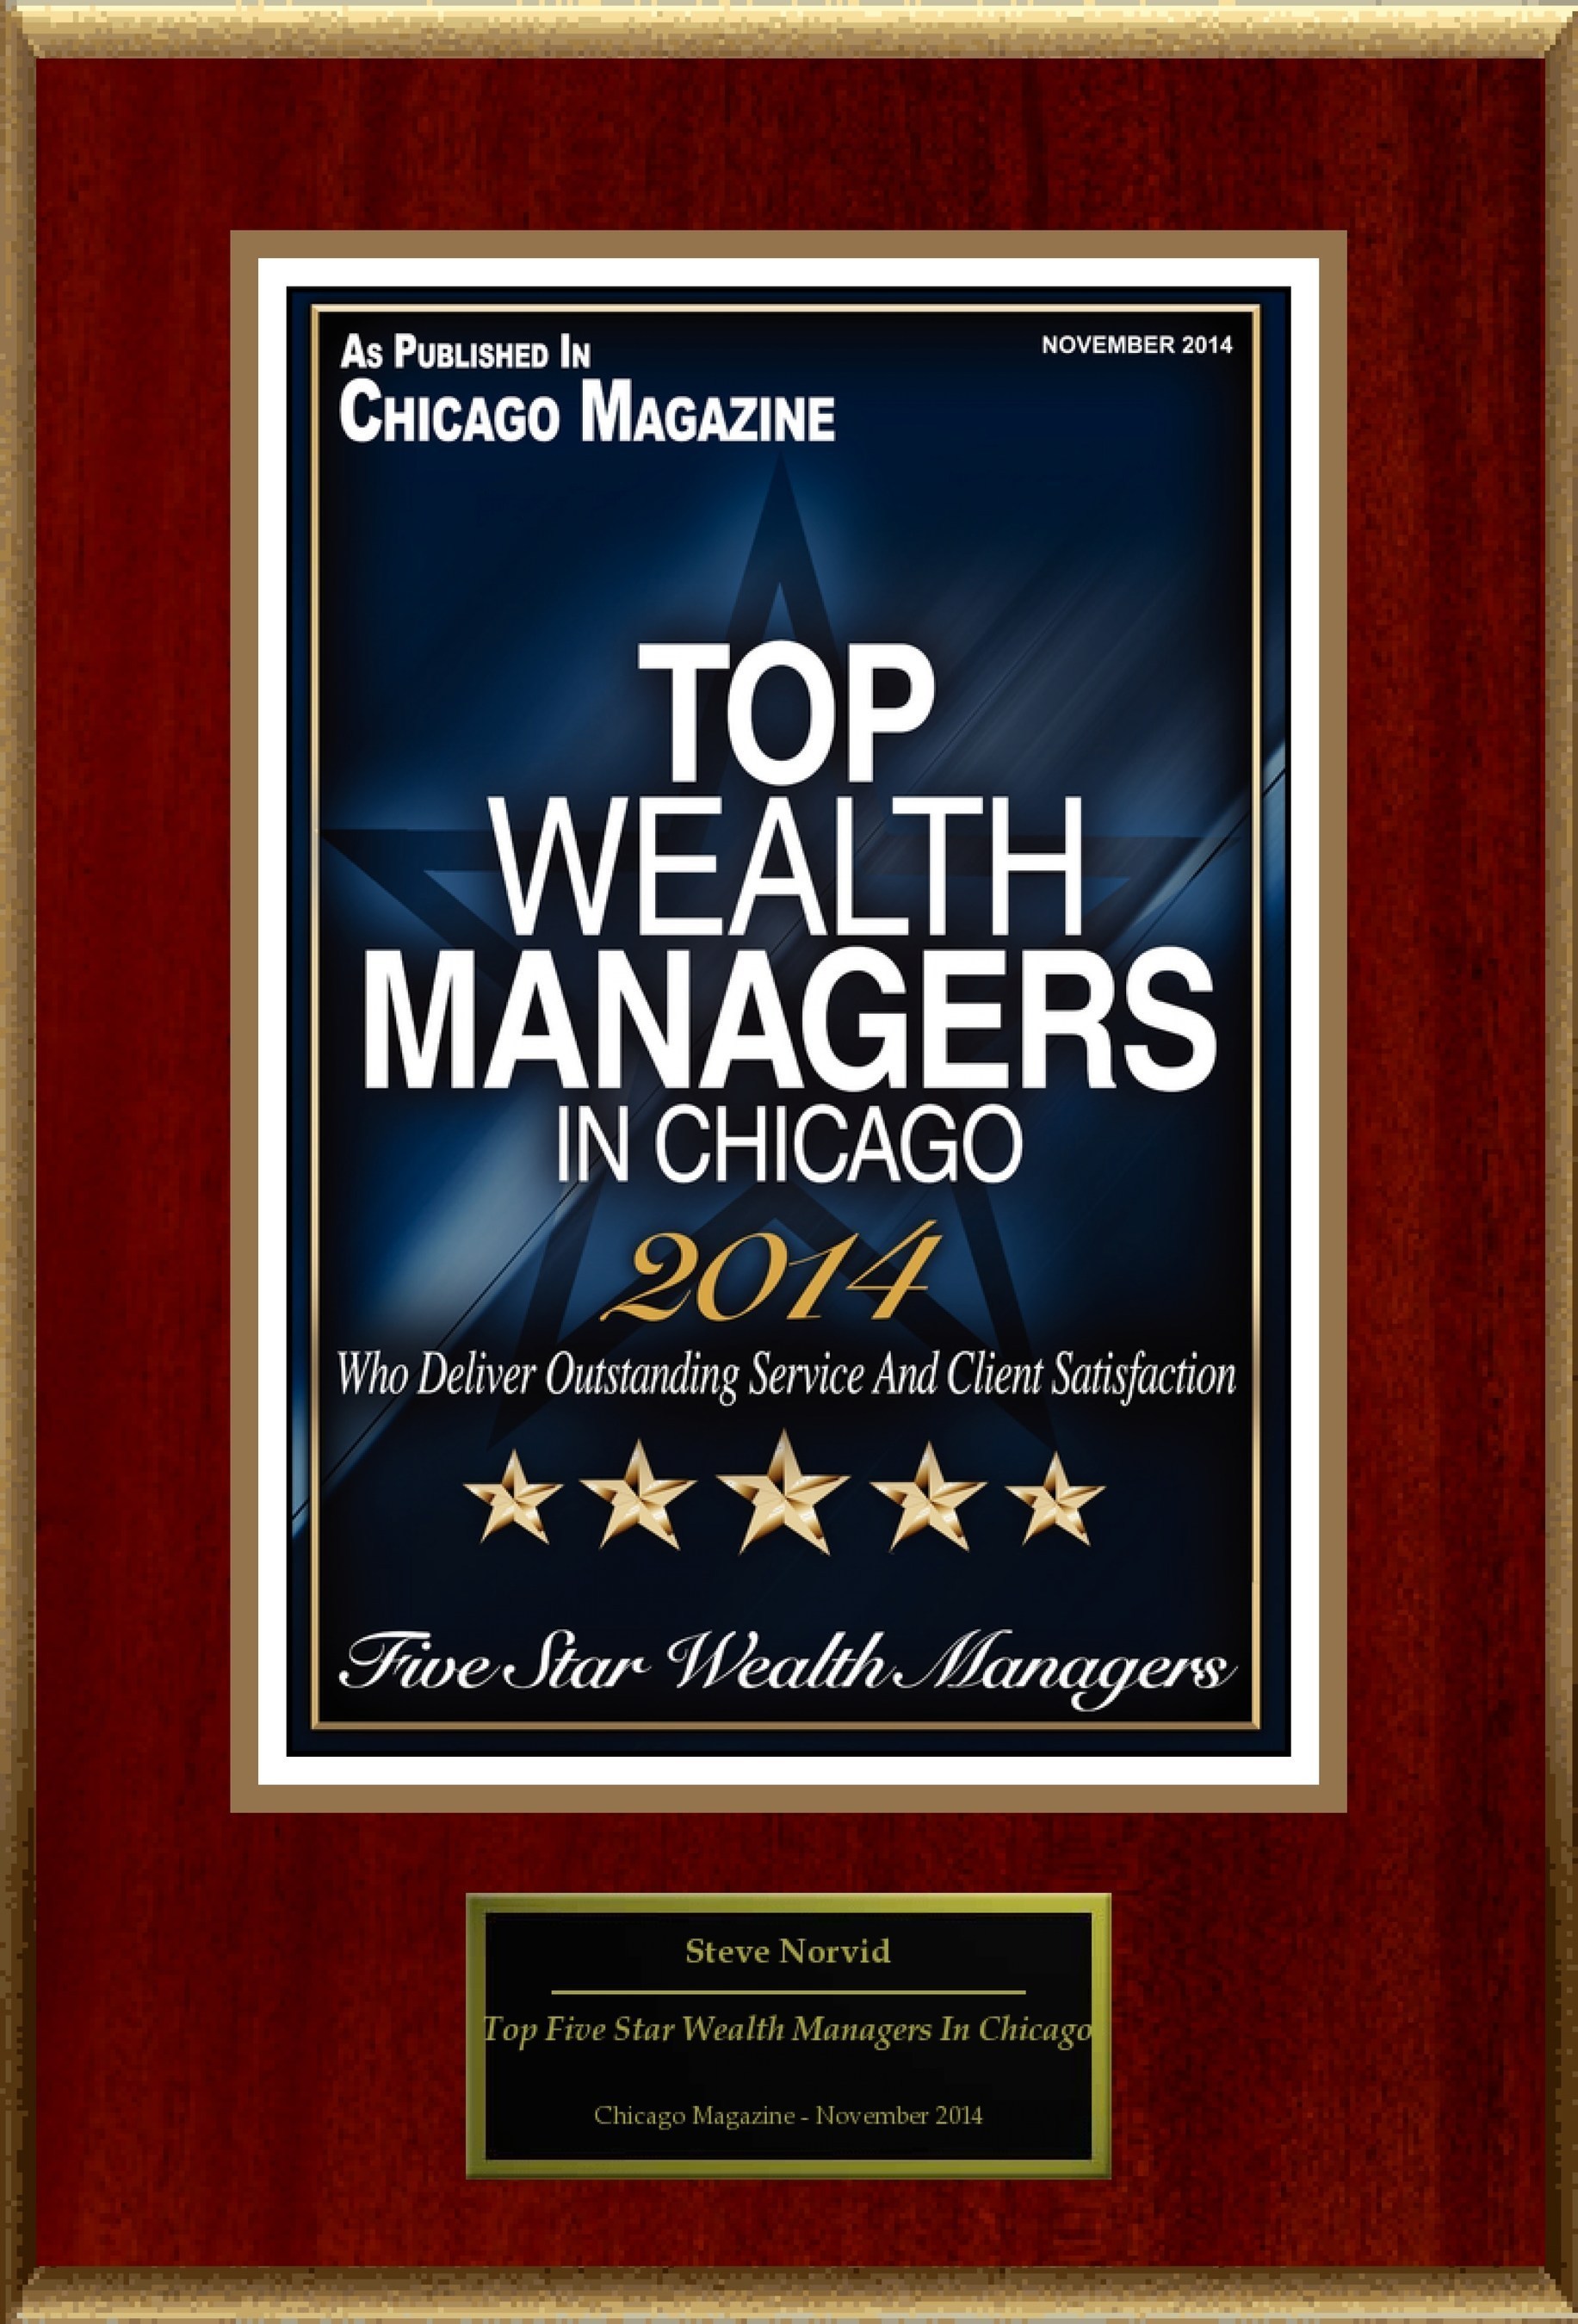 Siligmueller & Norvid Wealth Advisors Selected For "Top Five Star Wealth Managers In Chicago"